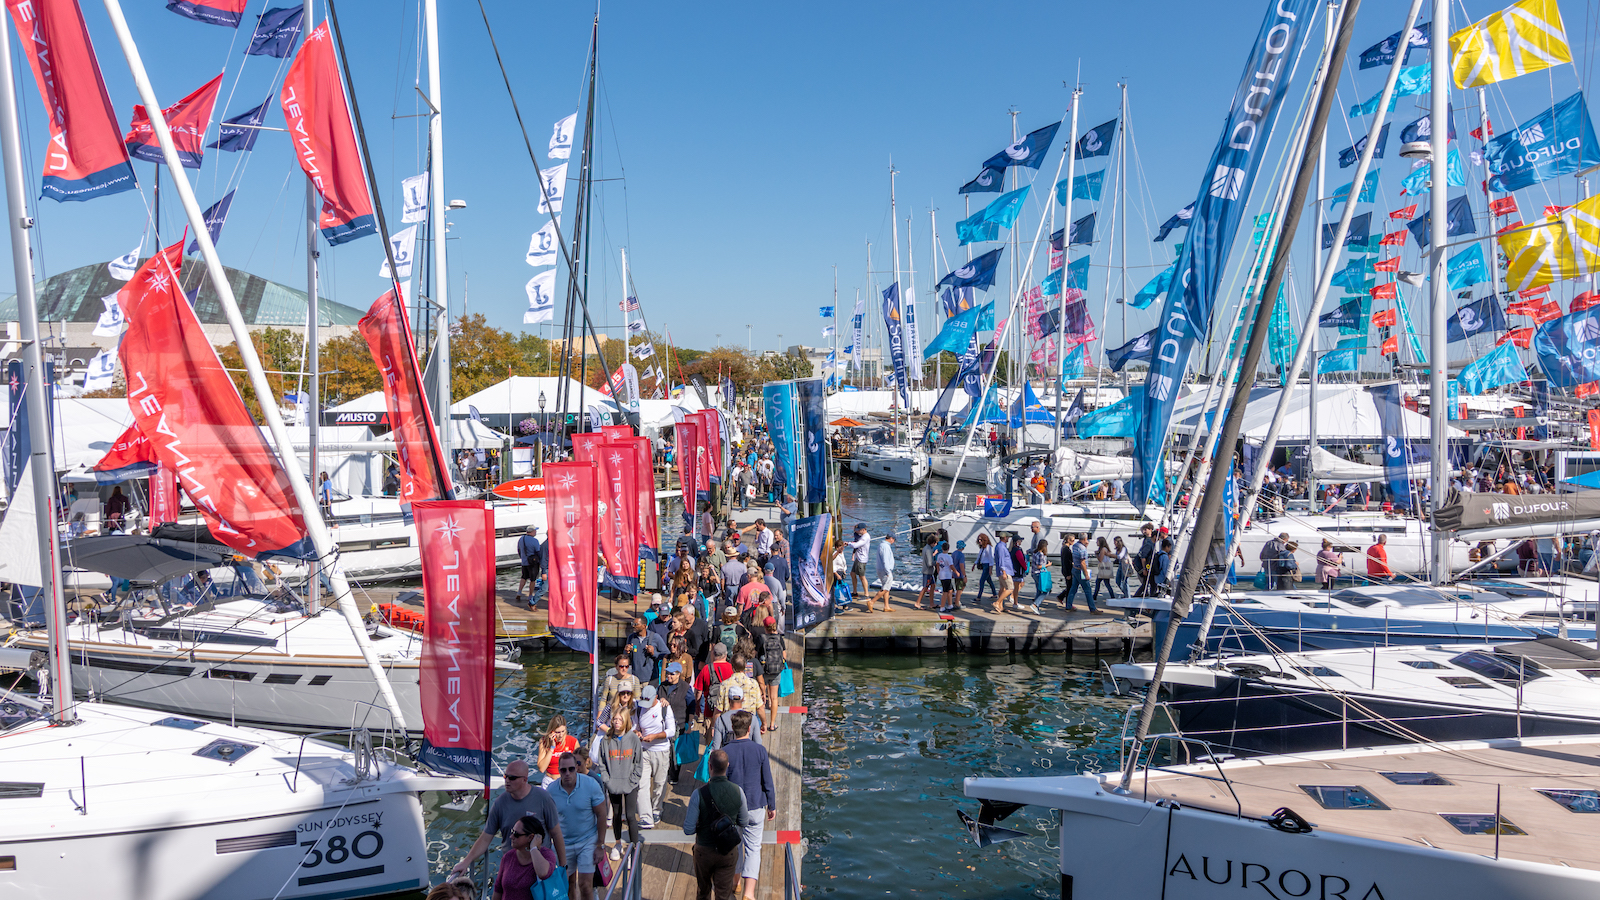 Annapolis Sailboat Show is October 12 – 15